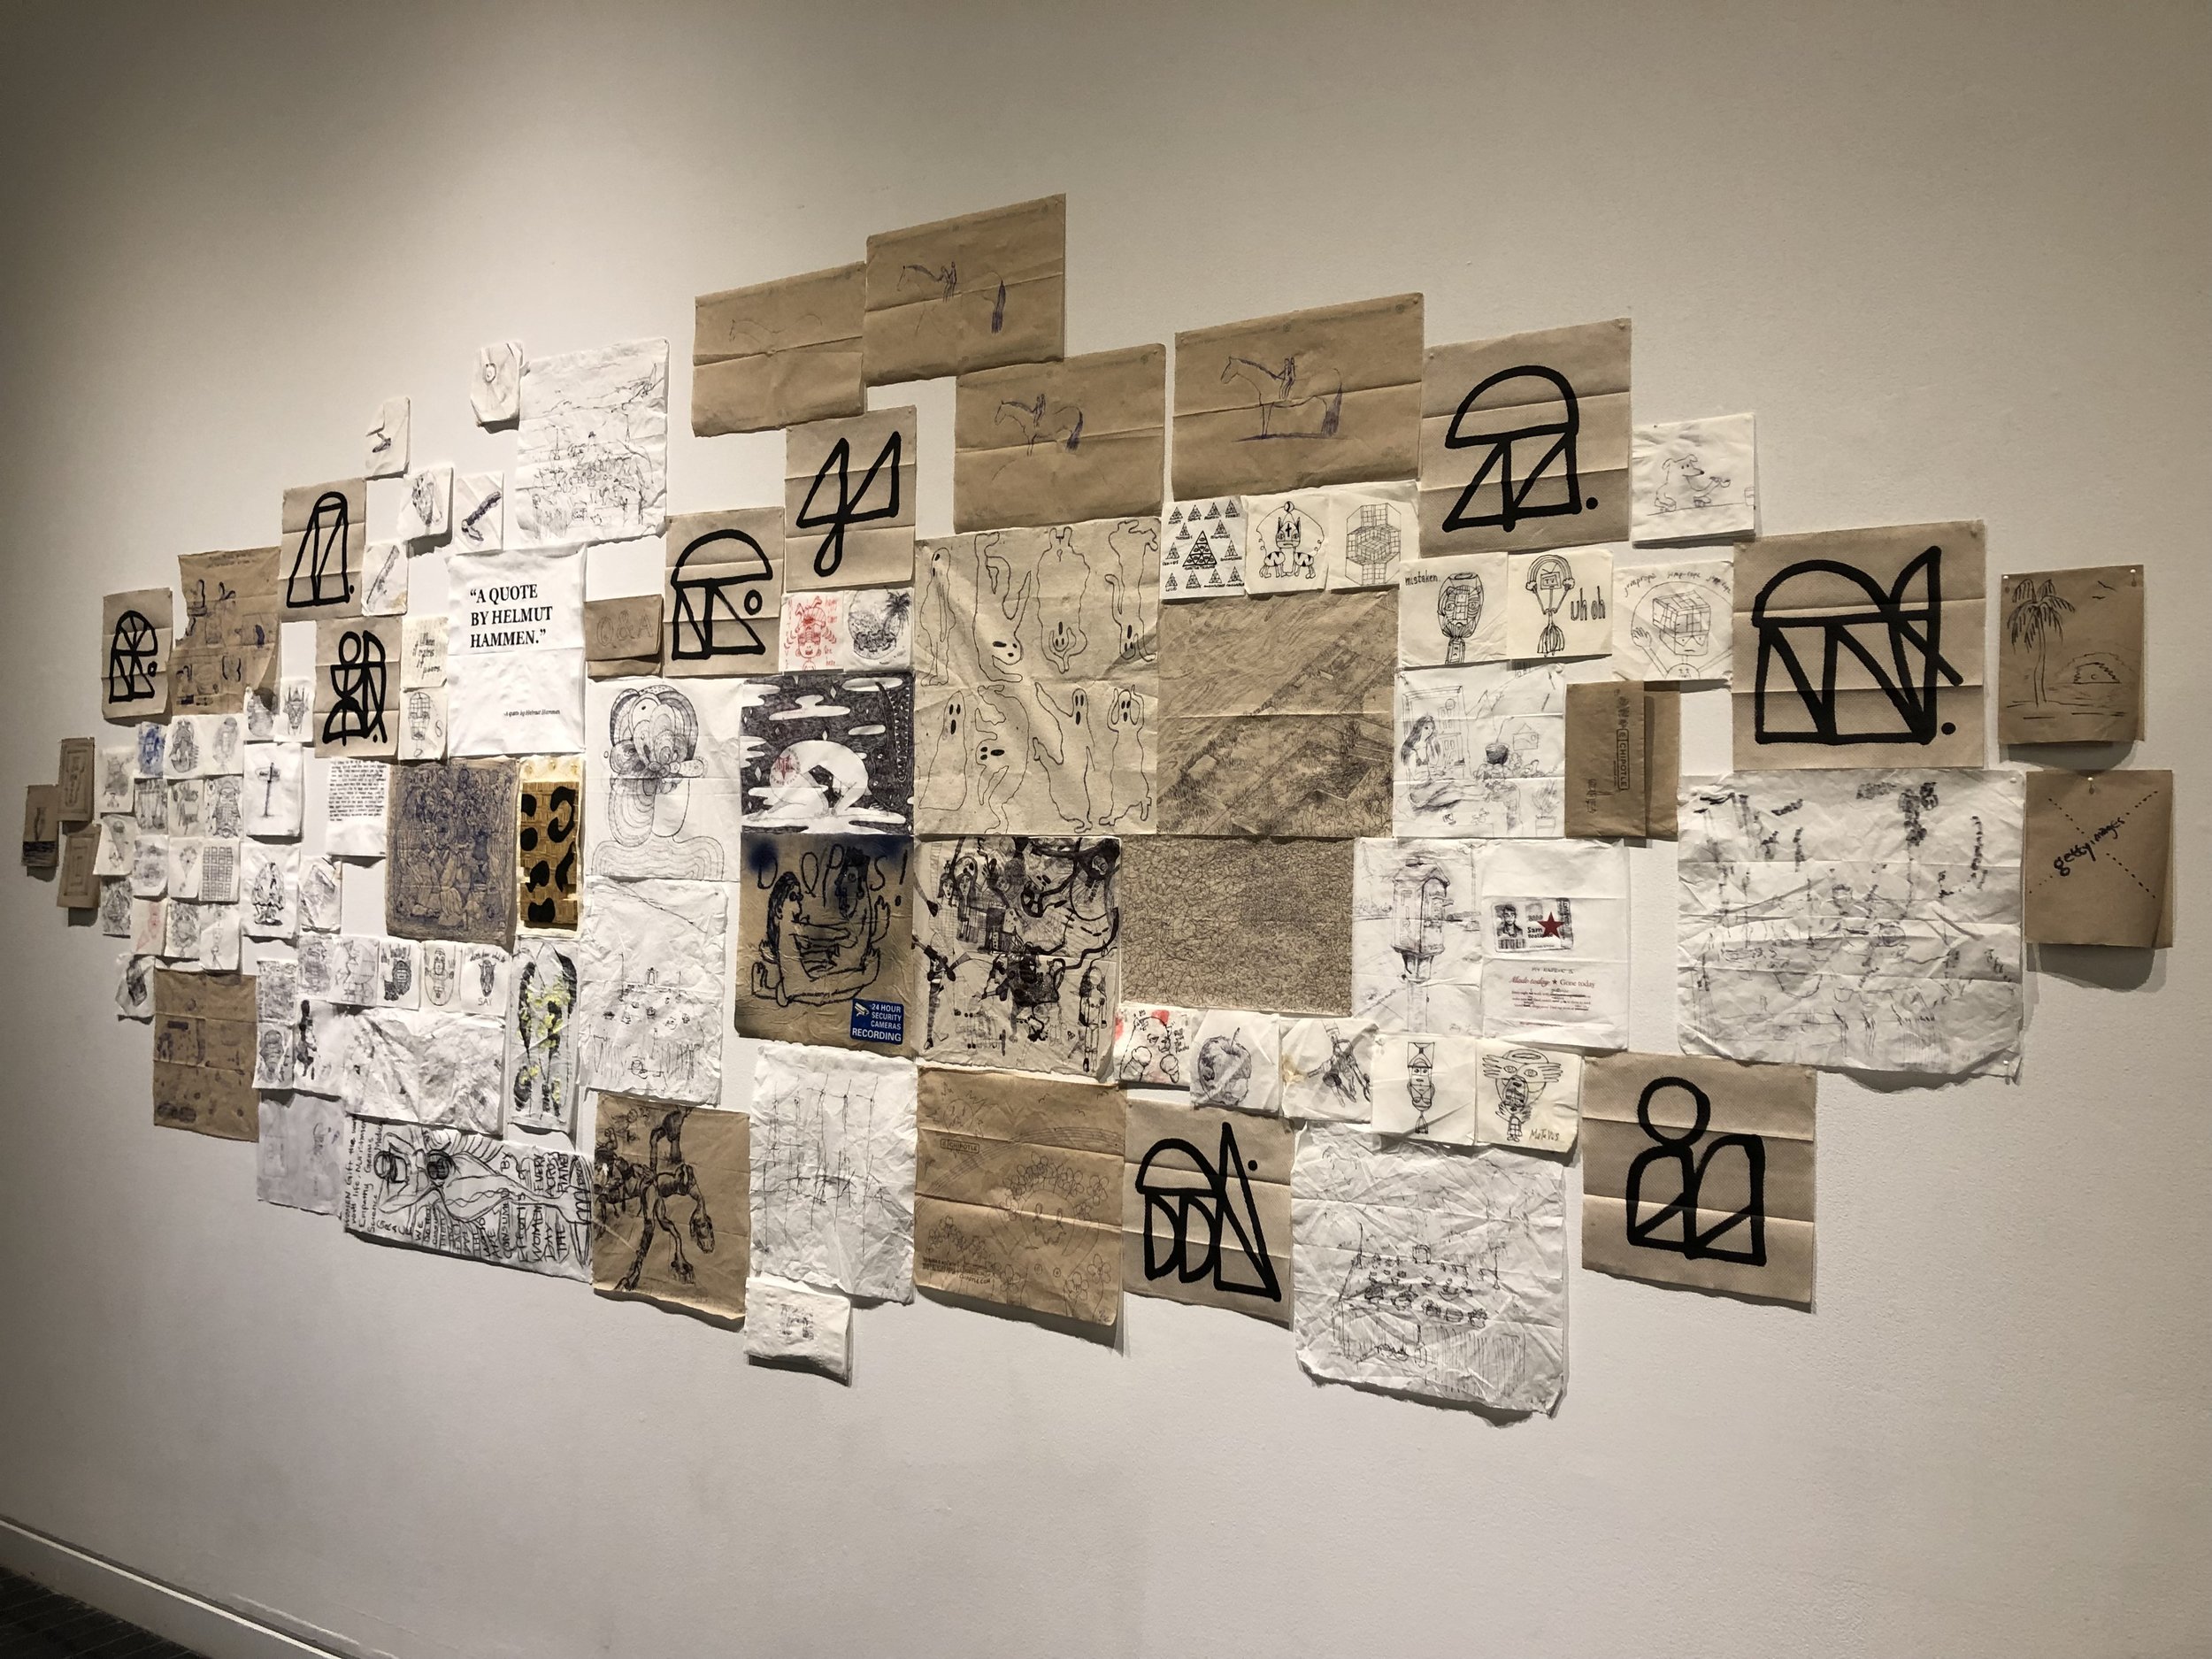 Napkin drawings within José Lerma curation at the Elmhurst Art Museum